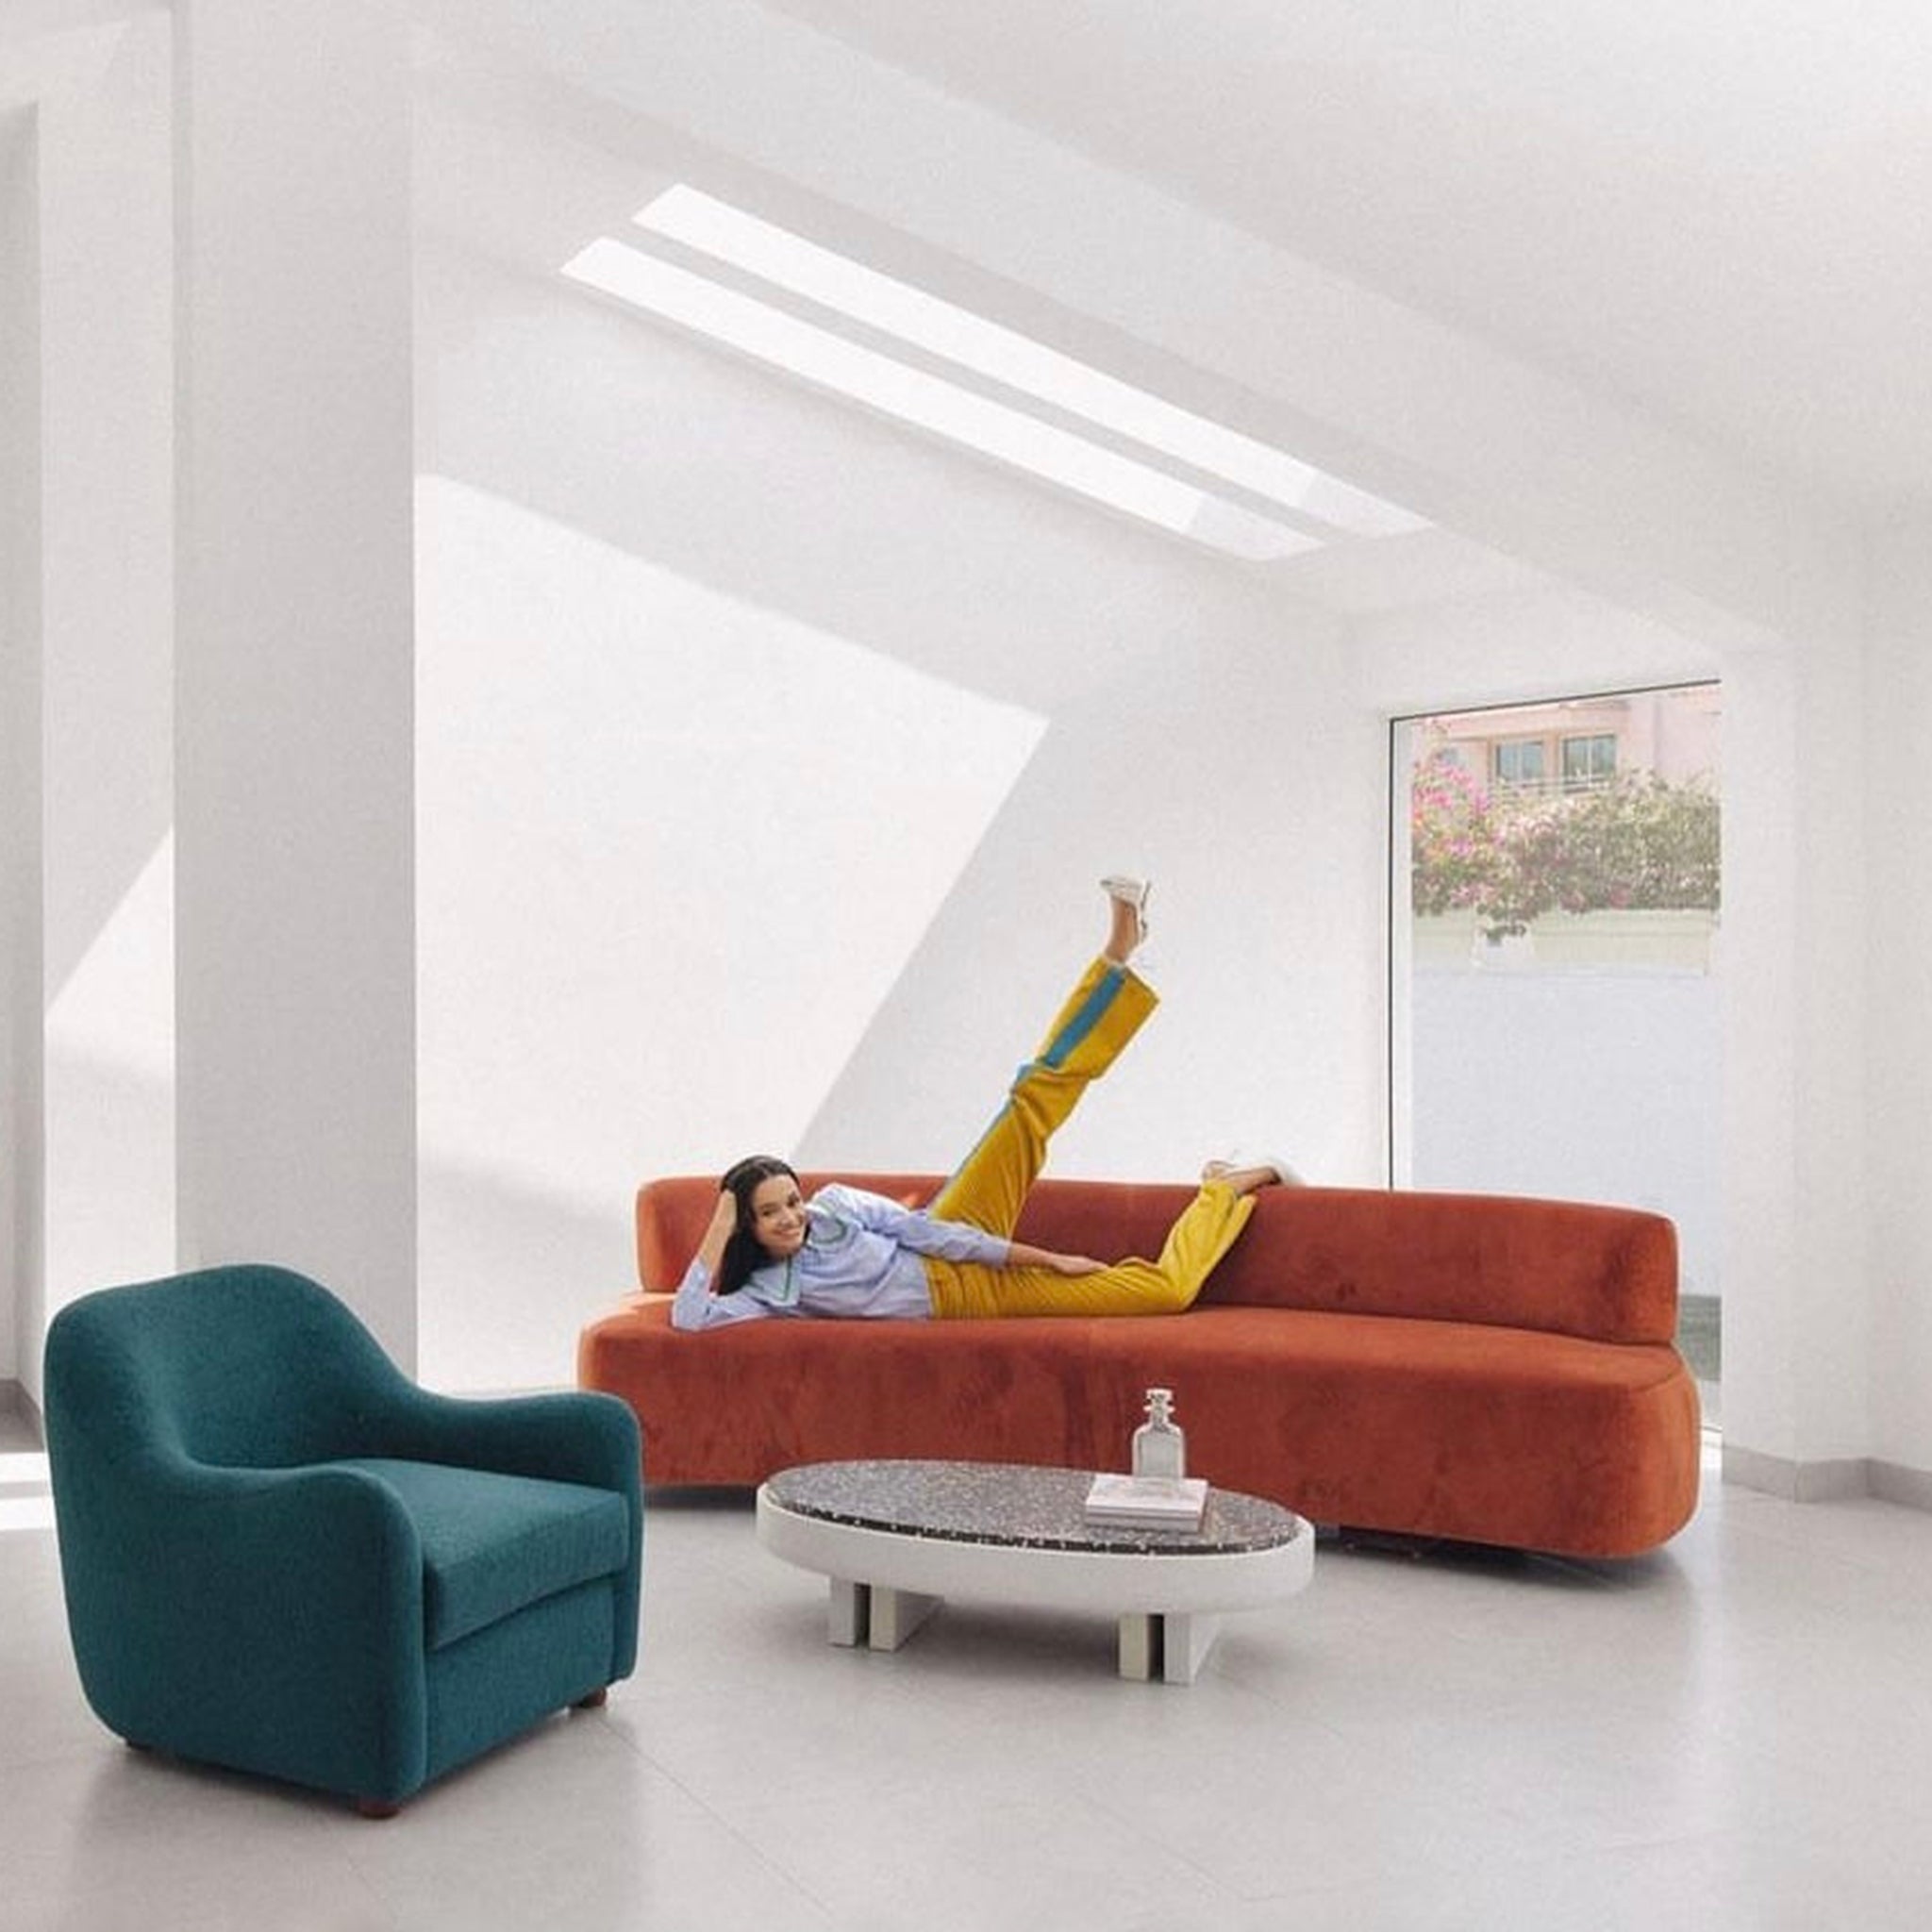 Bright and airy living room with a woman relaxing on a contemporary orange couch